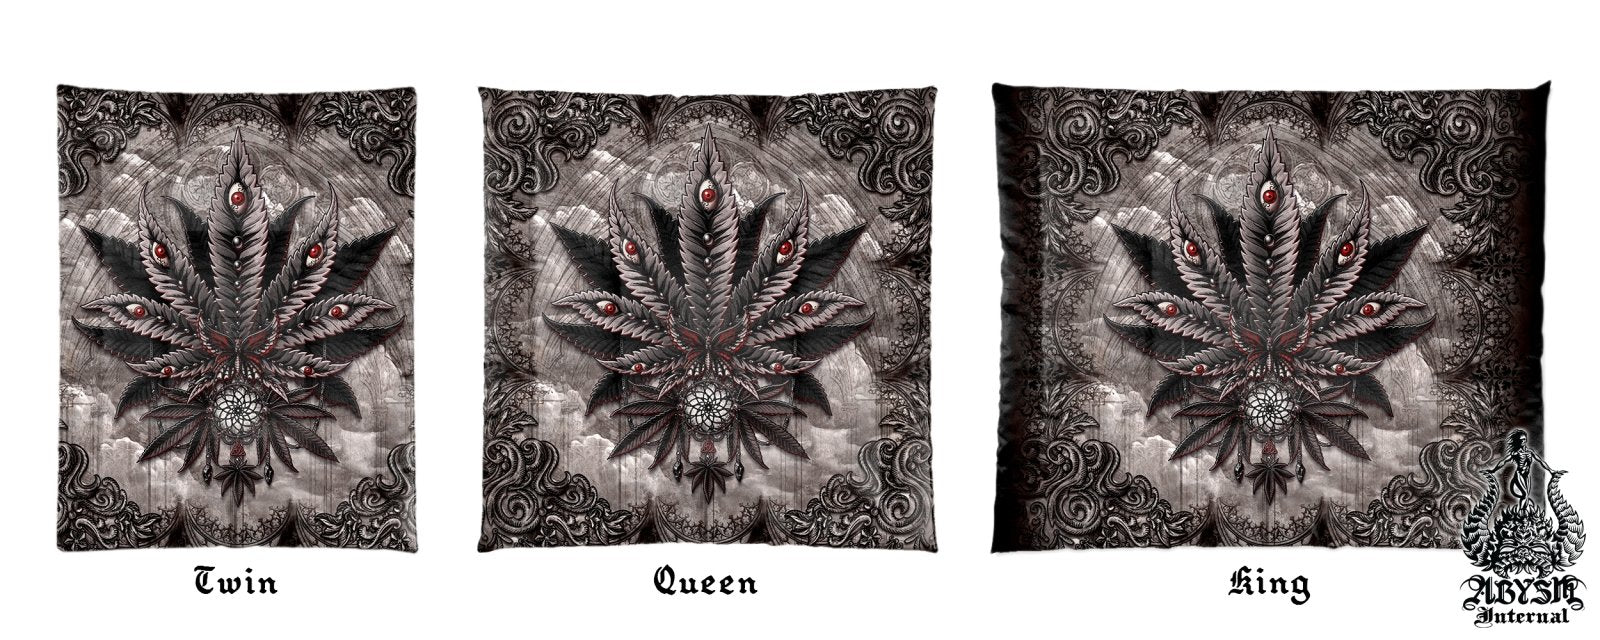 Gothic Weed Bedding Set, Comforter and Duvet, Cannabis Bed Cover, Marijuana Bedroom Decor, King, Queen and Twin Size, 420 Room Art - Horror Grey - Abysm Internal